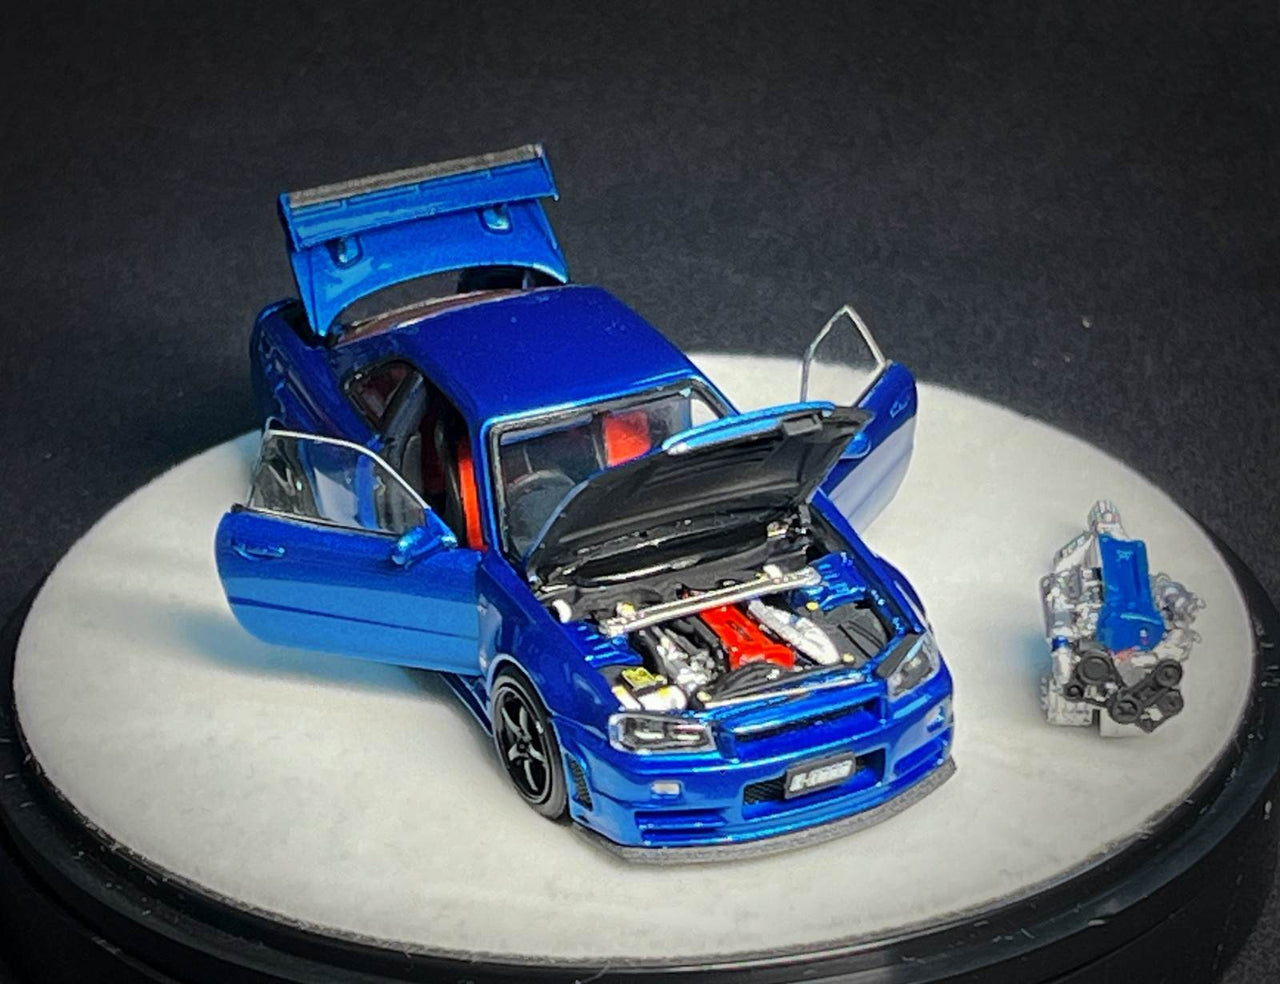 PGM 1:64 Nissan GT-R R34 Z-Tune, Blue with Engine "Luxury w/ Turntable"